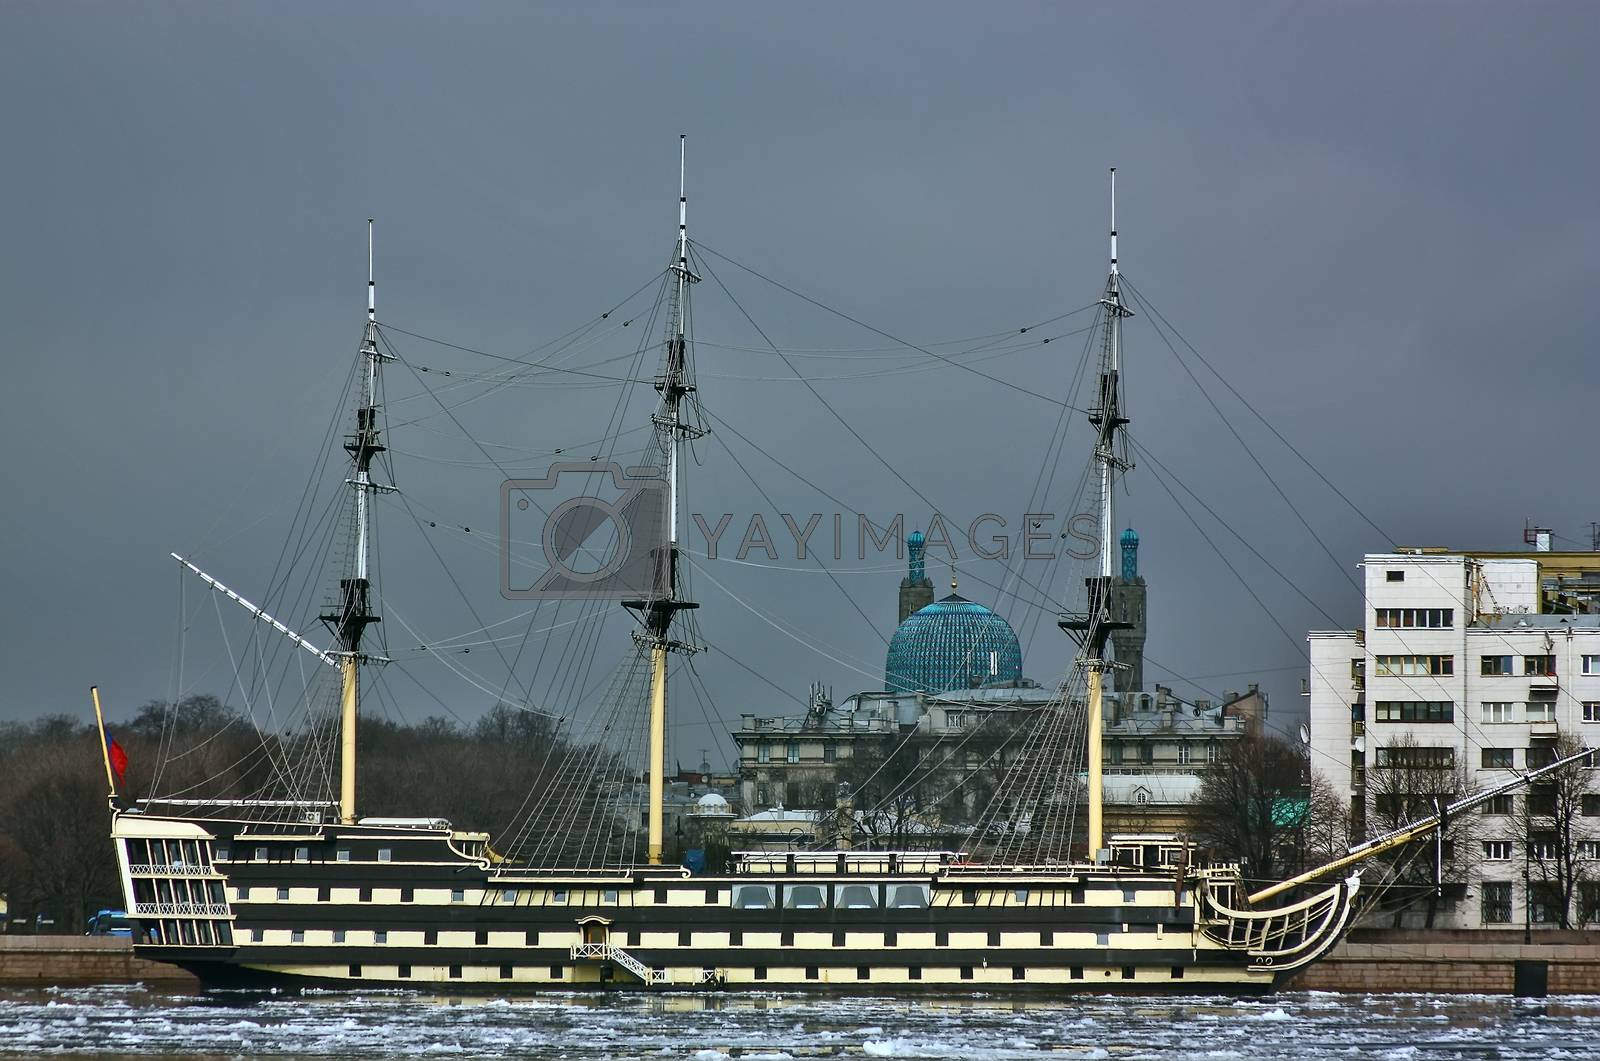 Royalty free image of Frigate "Good fortune", Saint Petersburg,Russia by borisb17